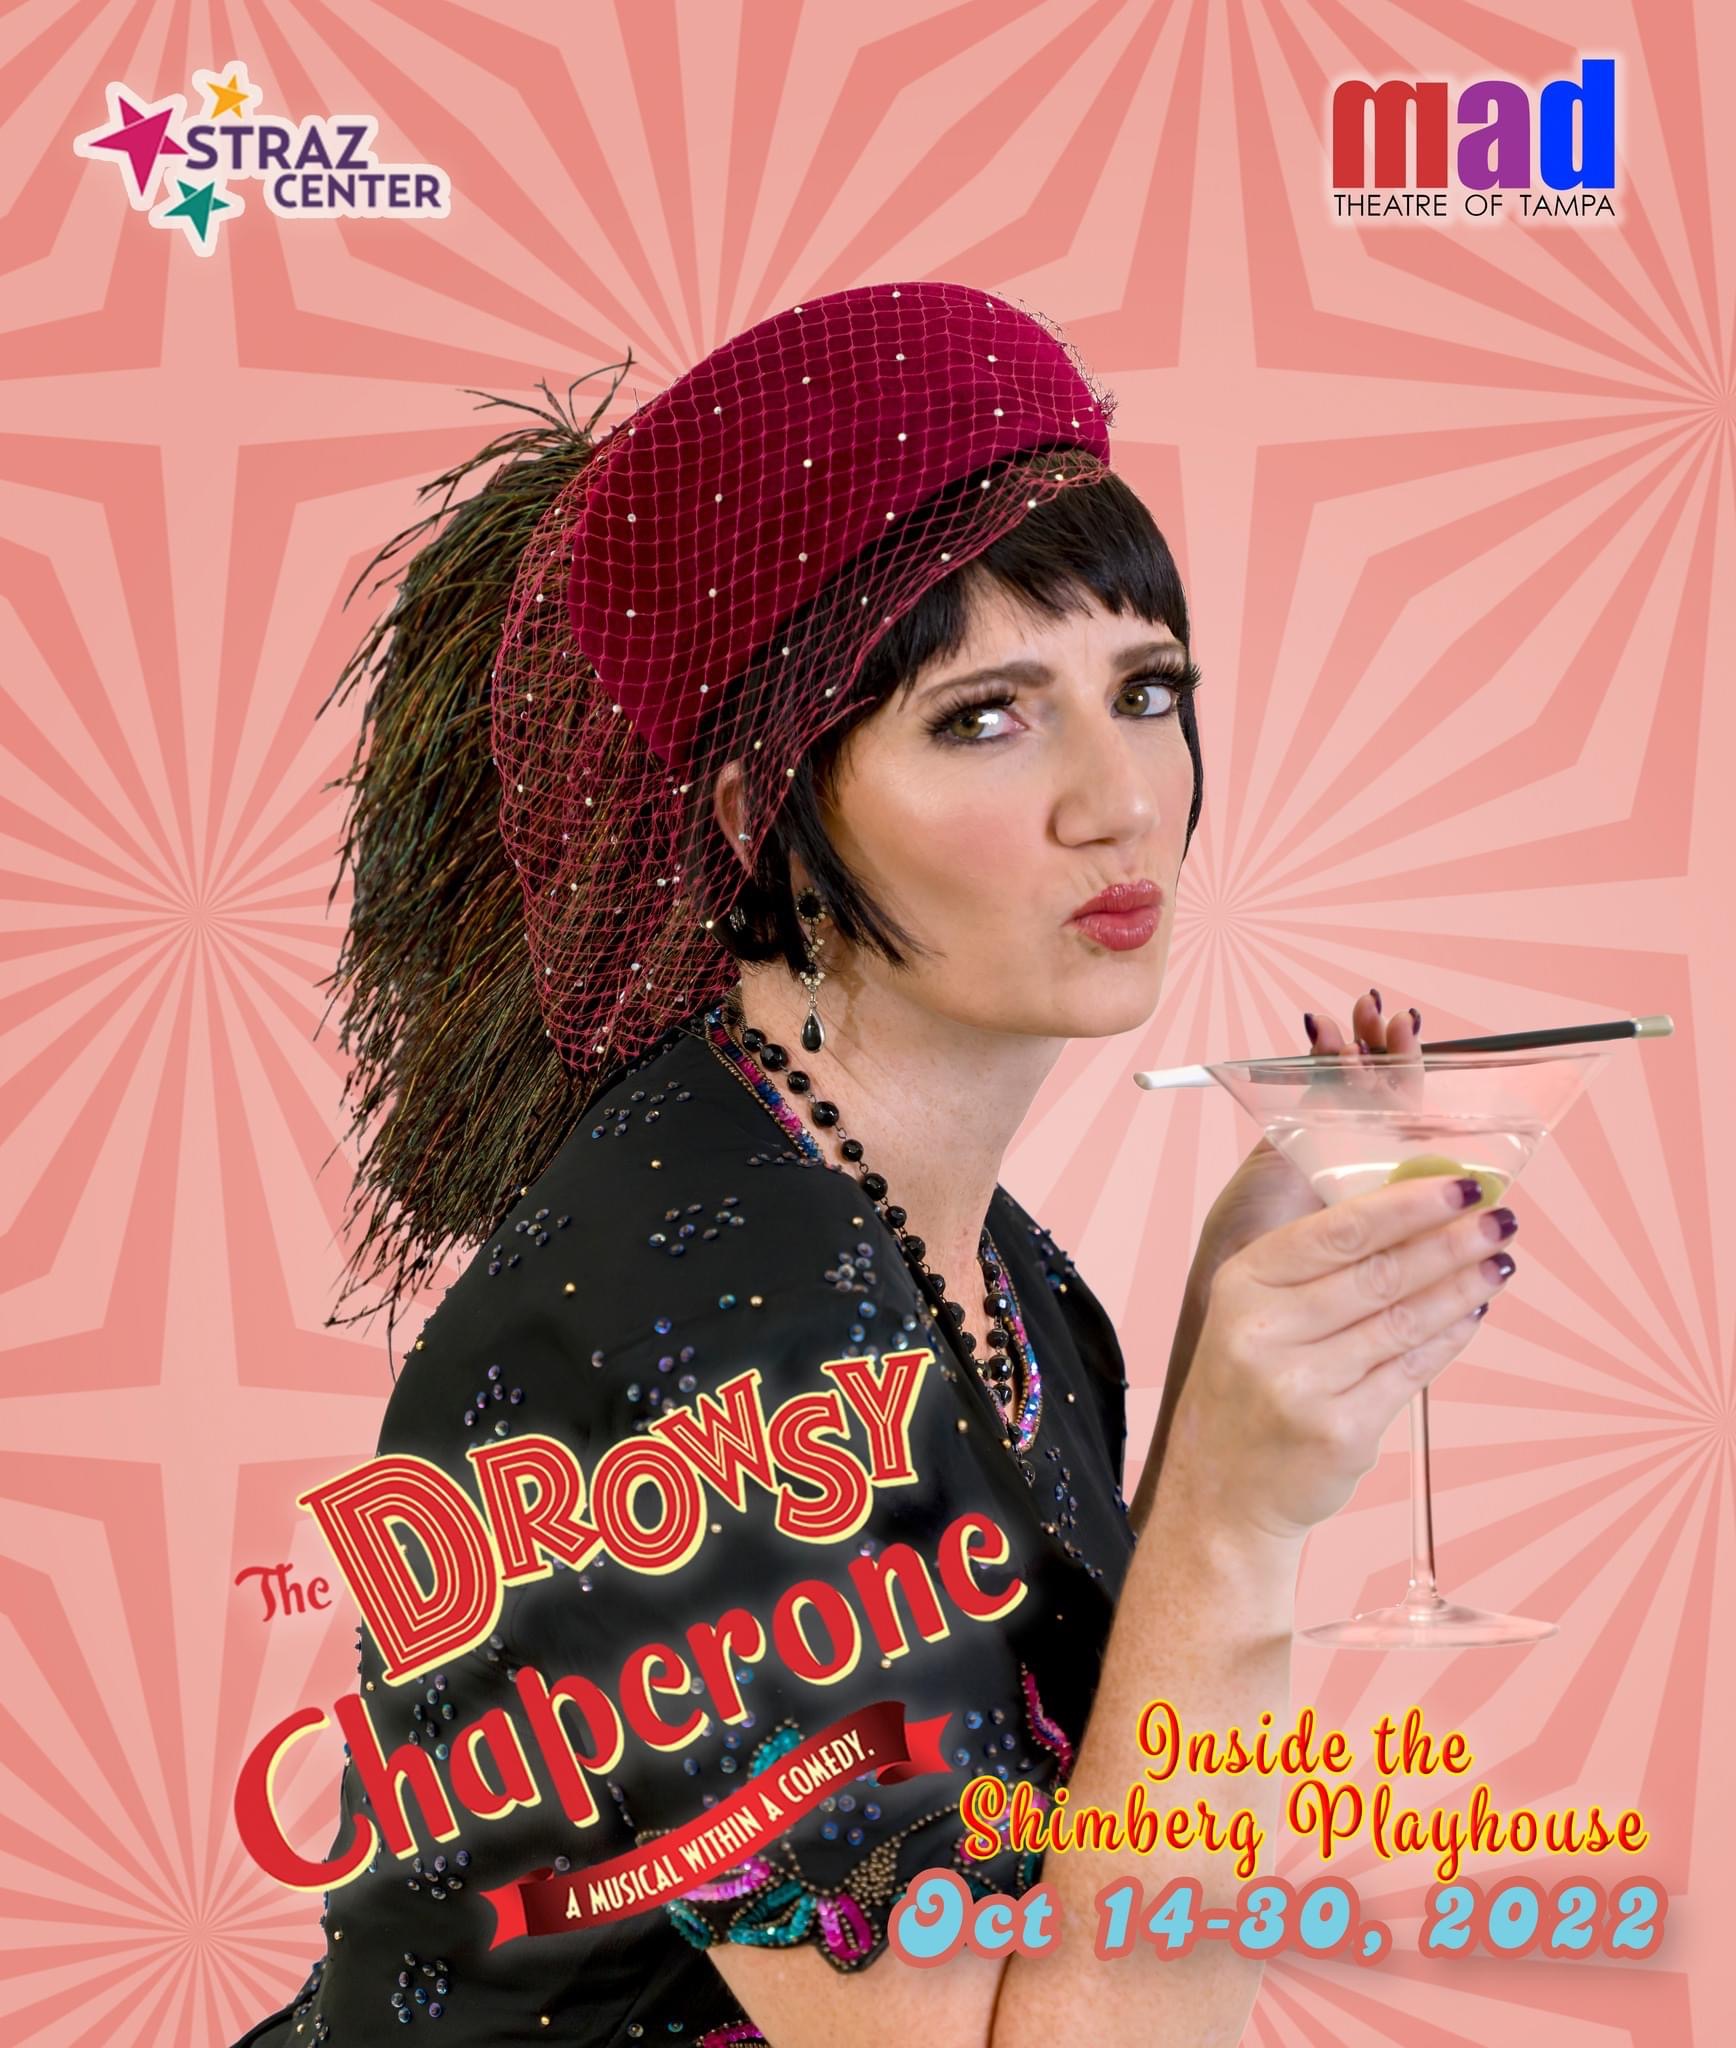 
Meet The Drowsy Chaperone as played by Jessica Berger-Vitalo in mad Theatre of Tampa’s “The Drowsy Chaperone
